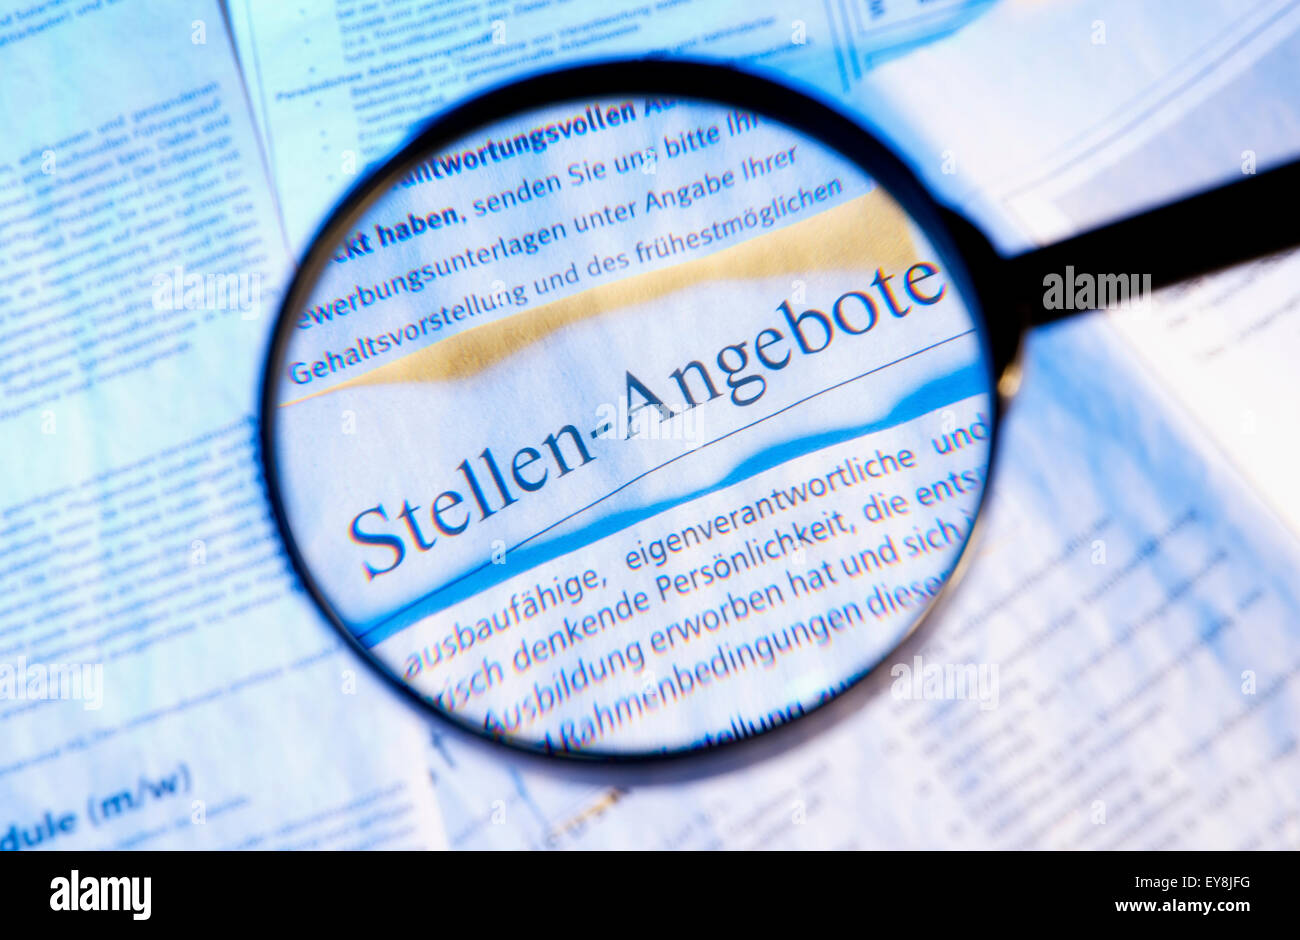 Job offers and Magnifier Stock Photo